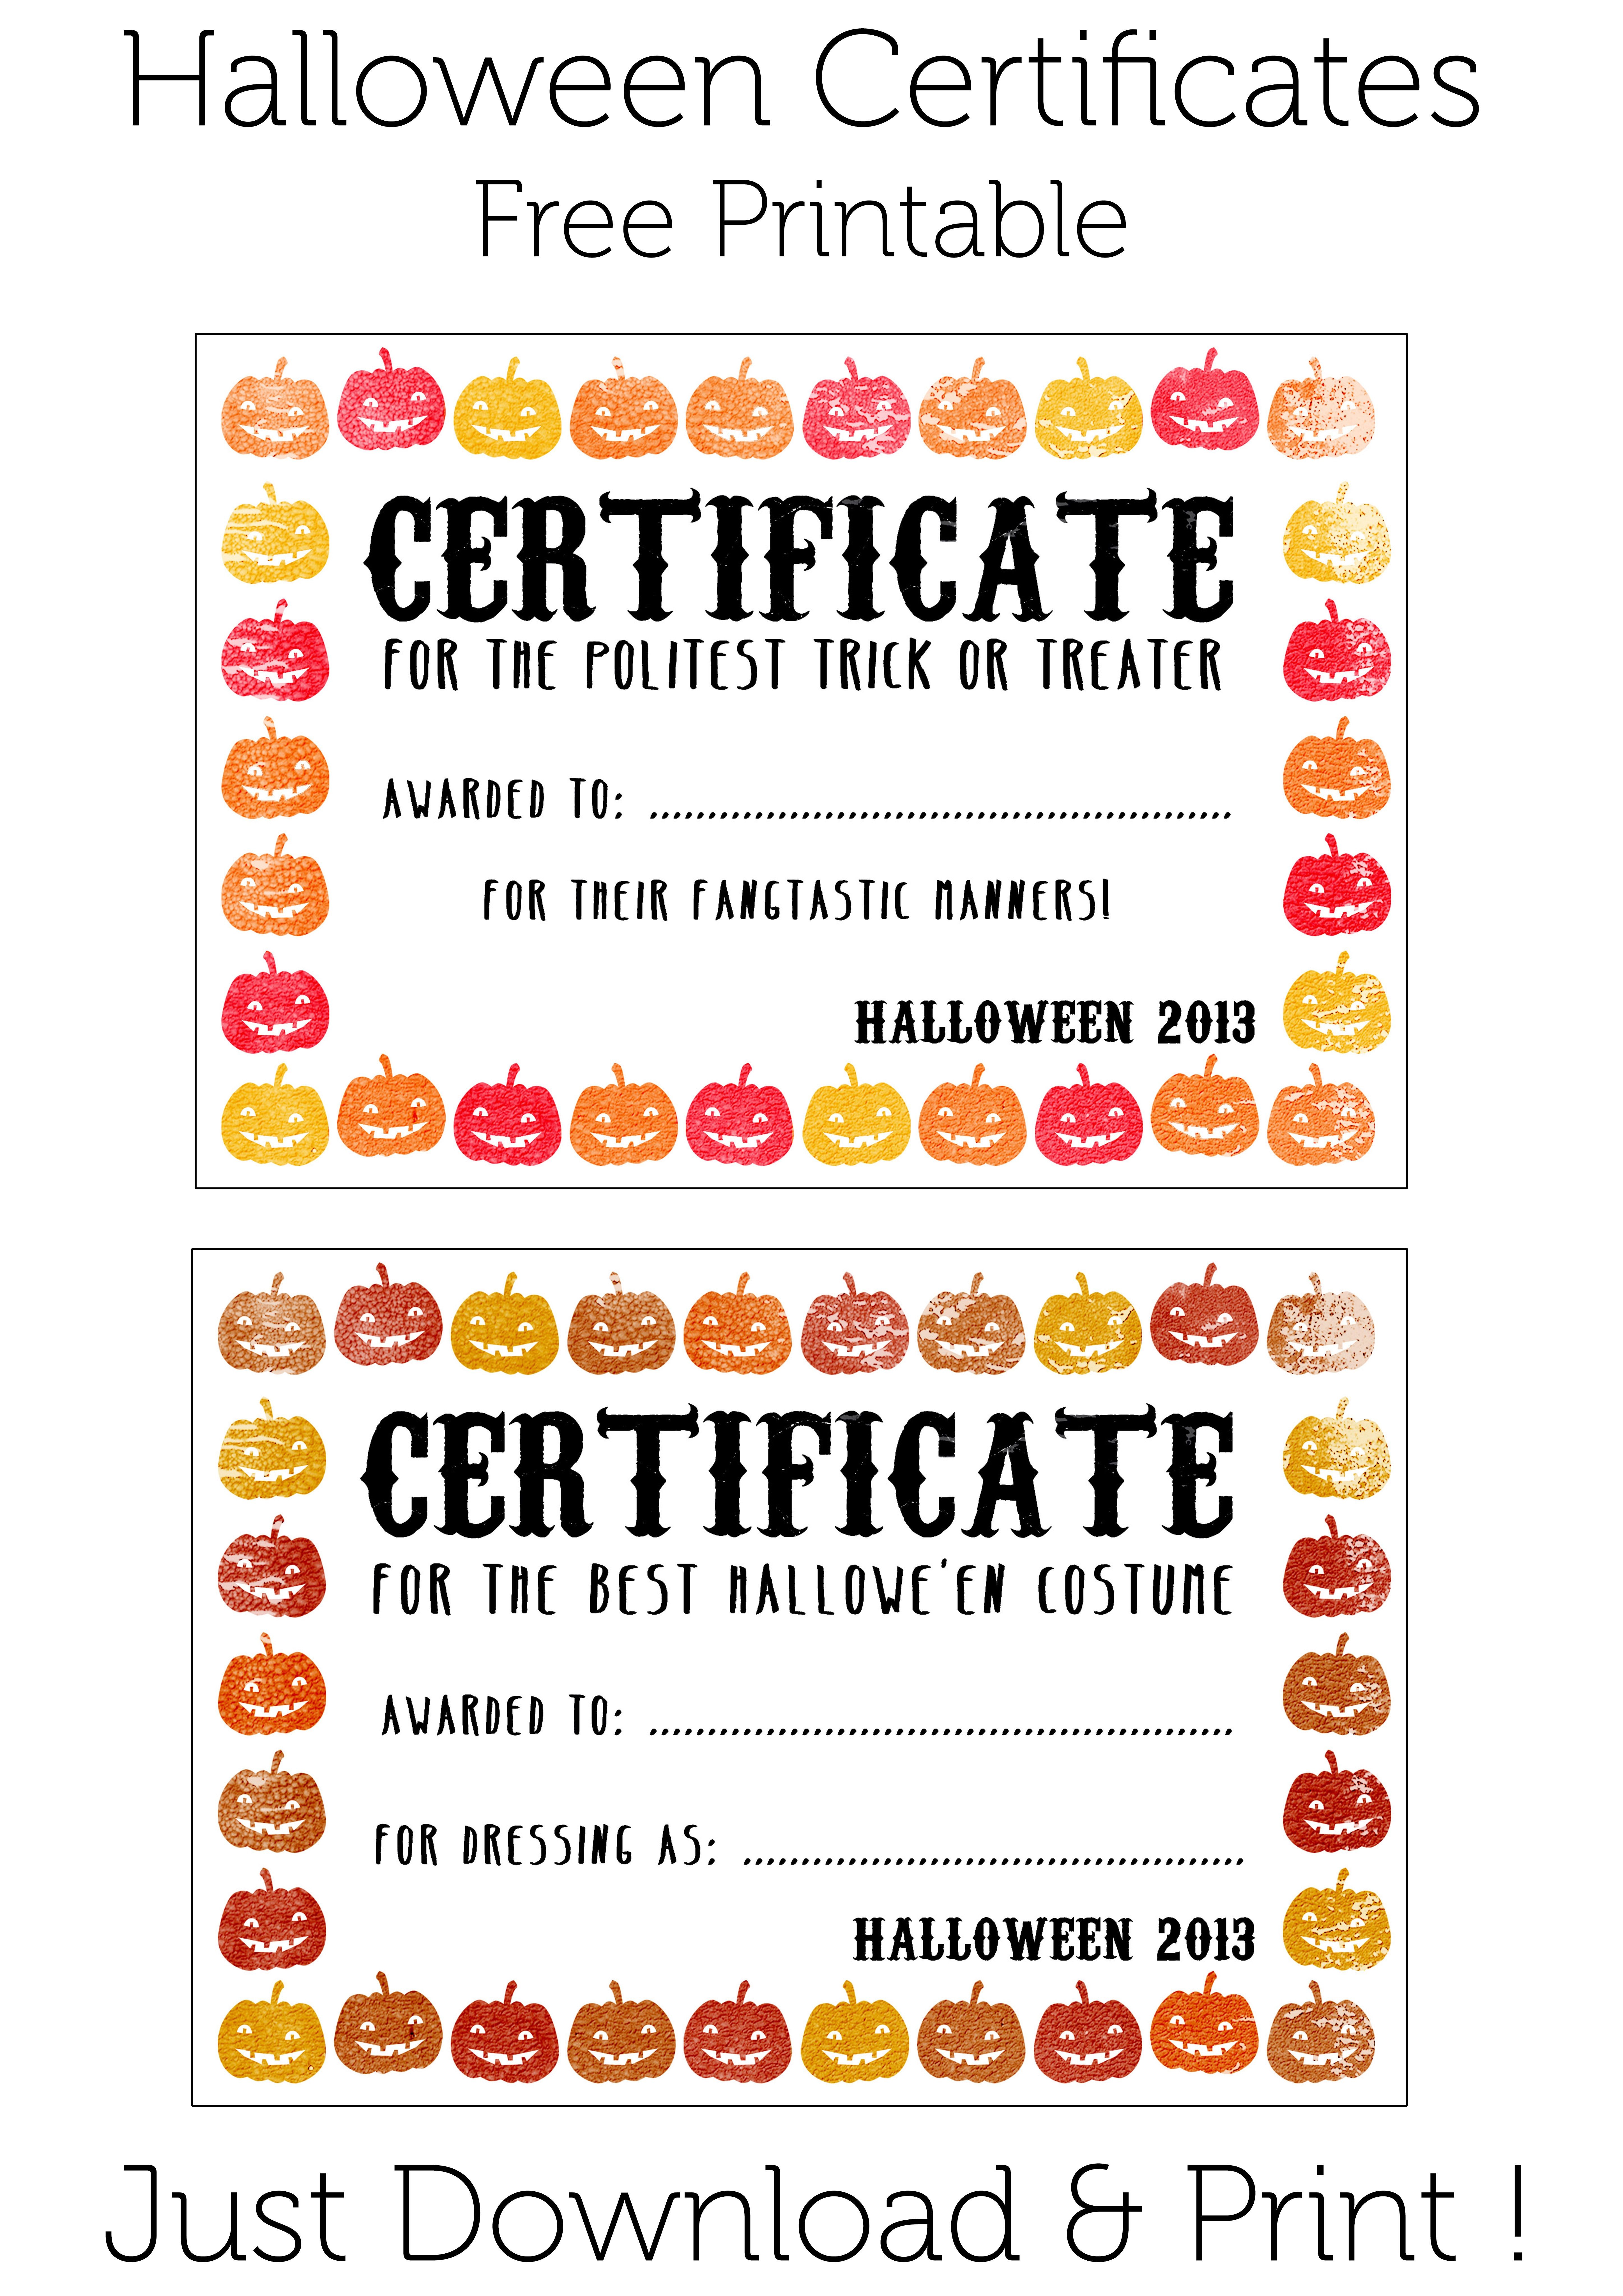 Halloween Certificates Give Them Out To Trick O Treaters As Well Download